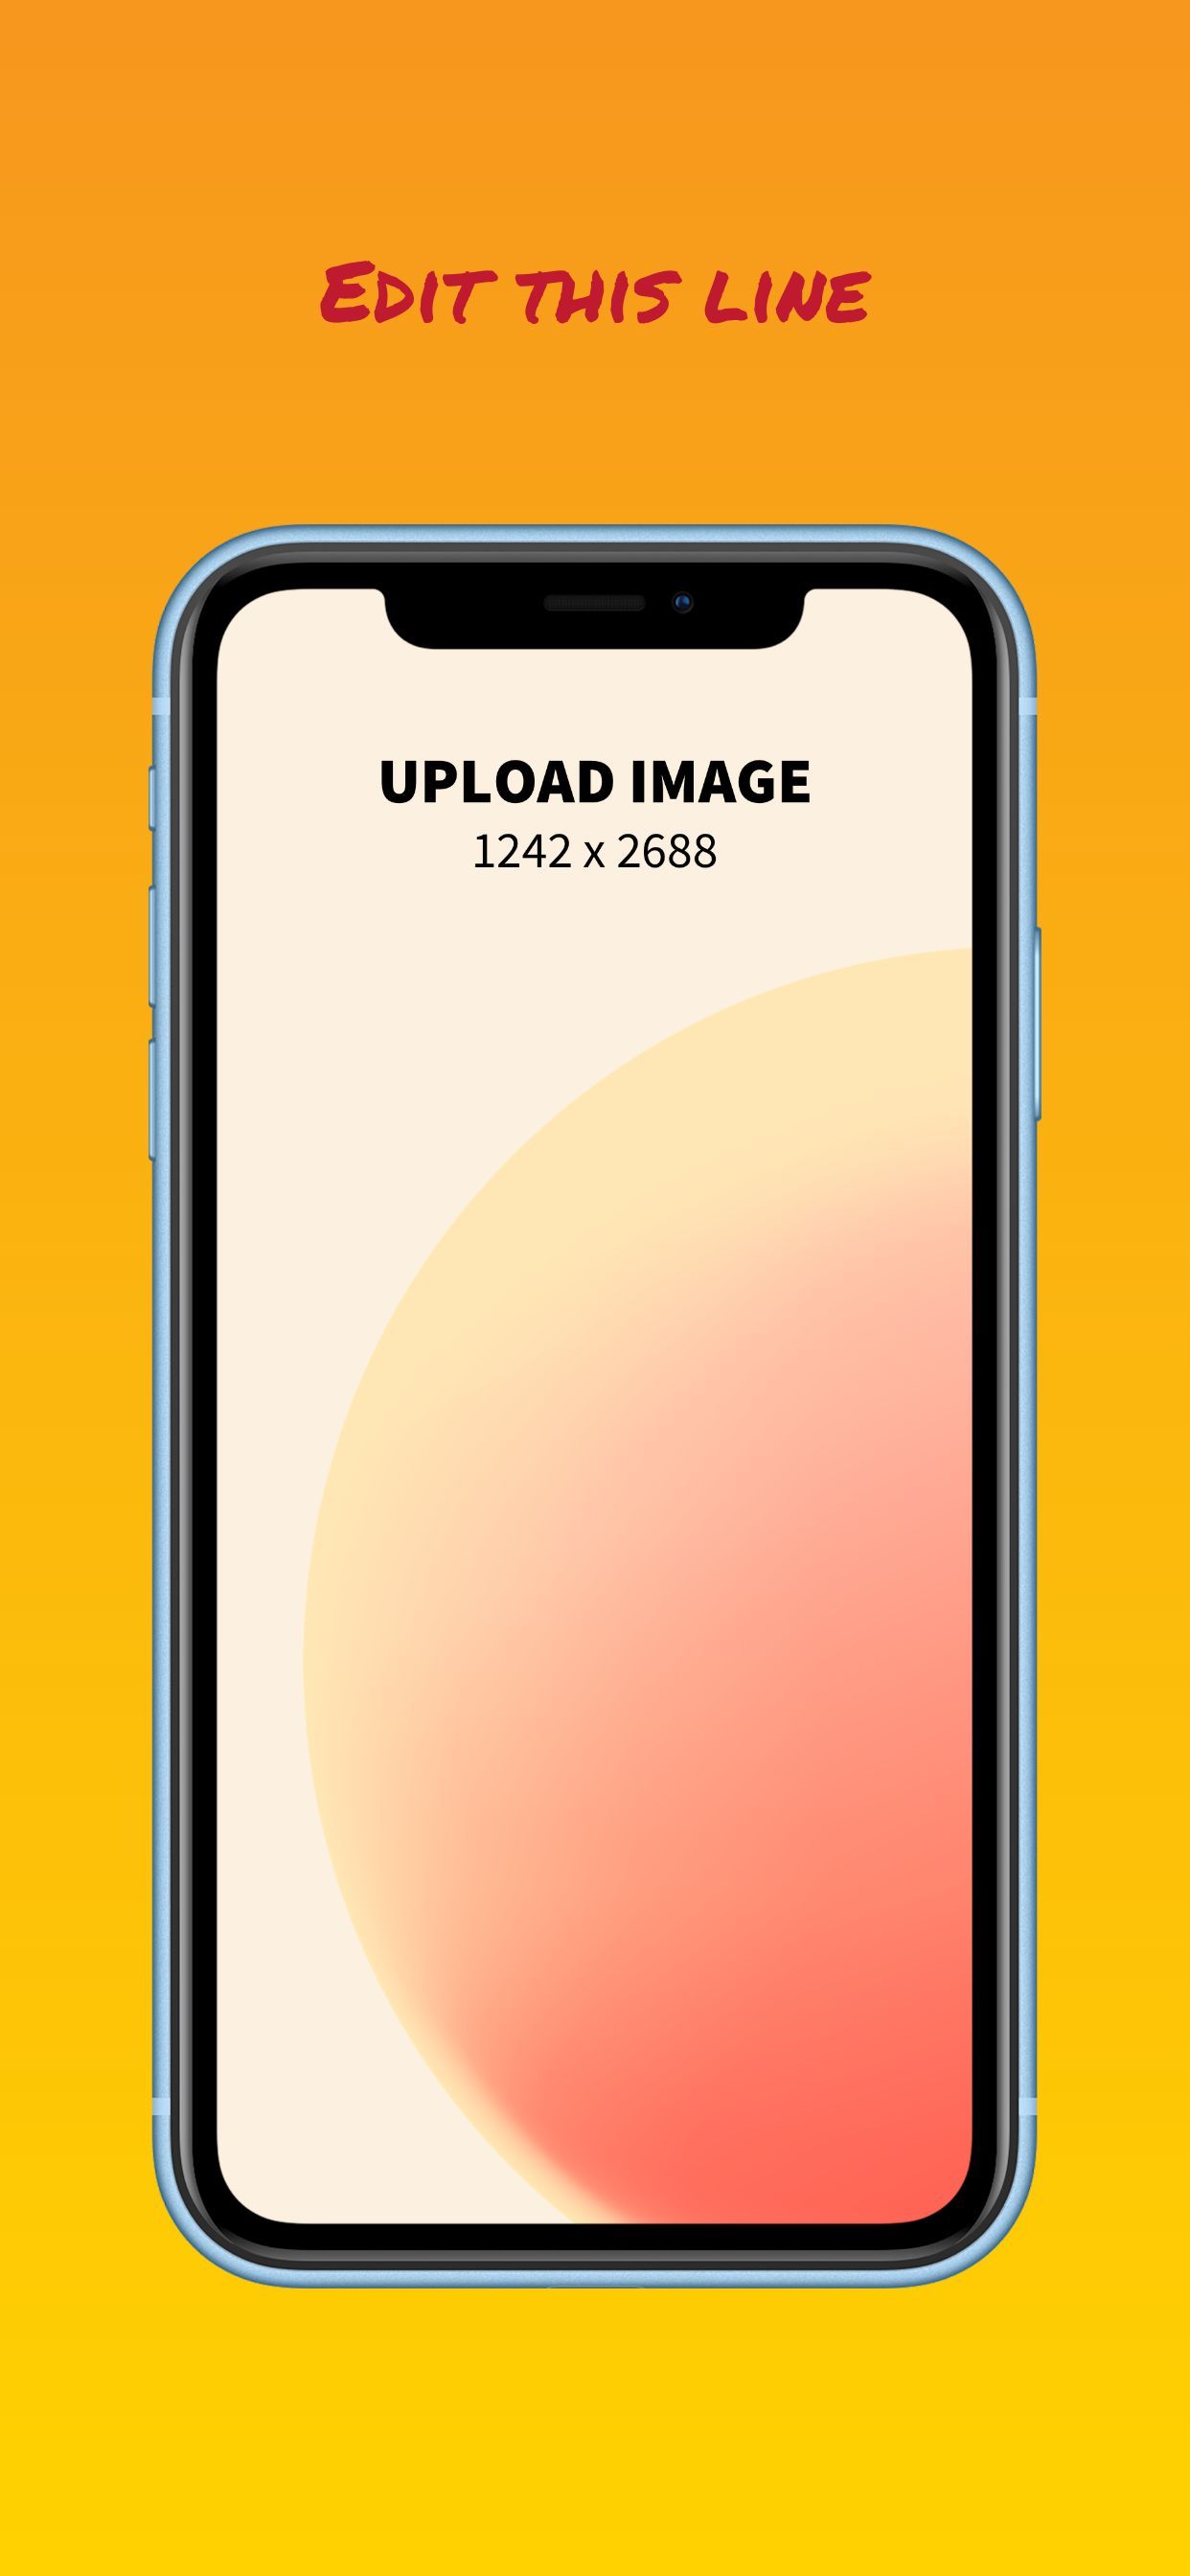 iPhone XS Max Screenshot 66 template. Quickly edit fonts, text, colors, and more for free.